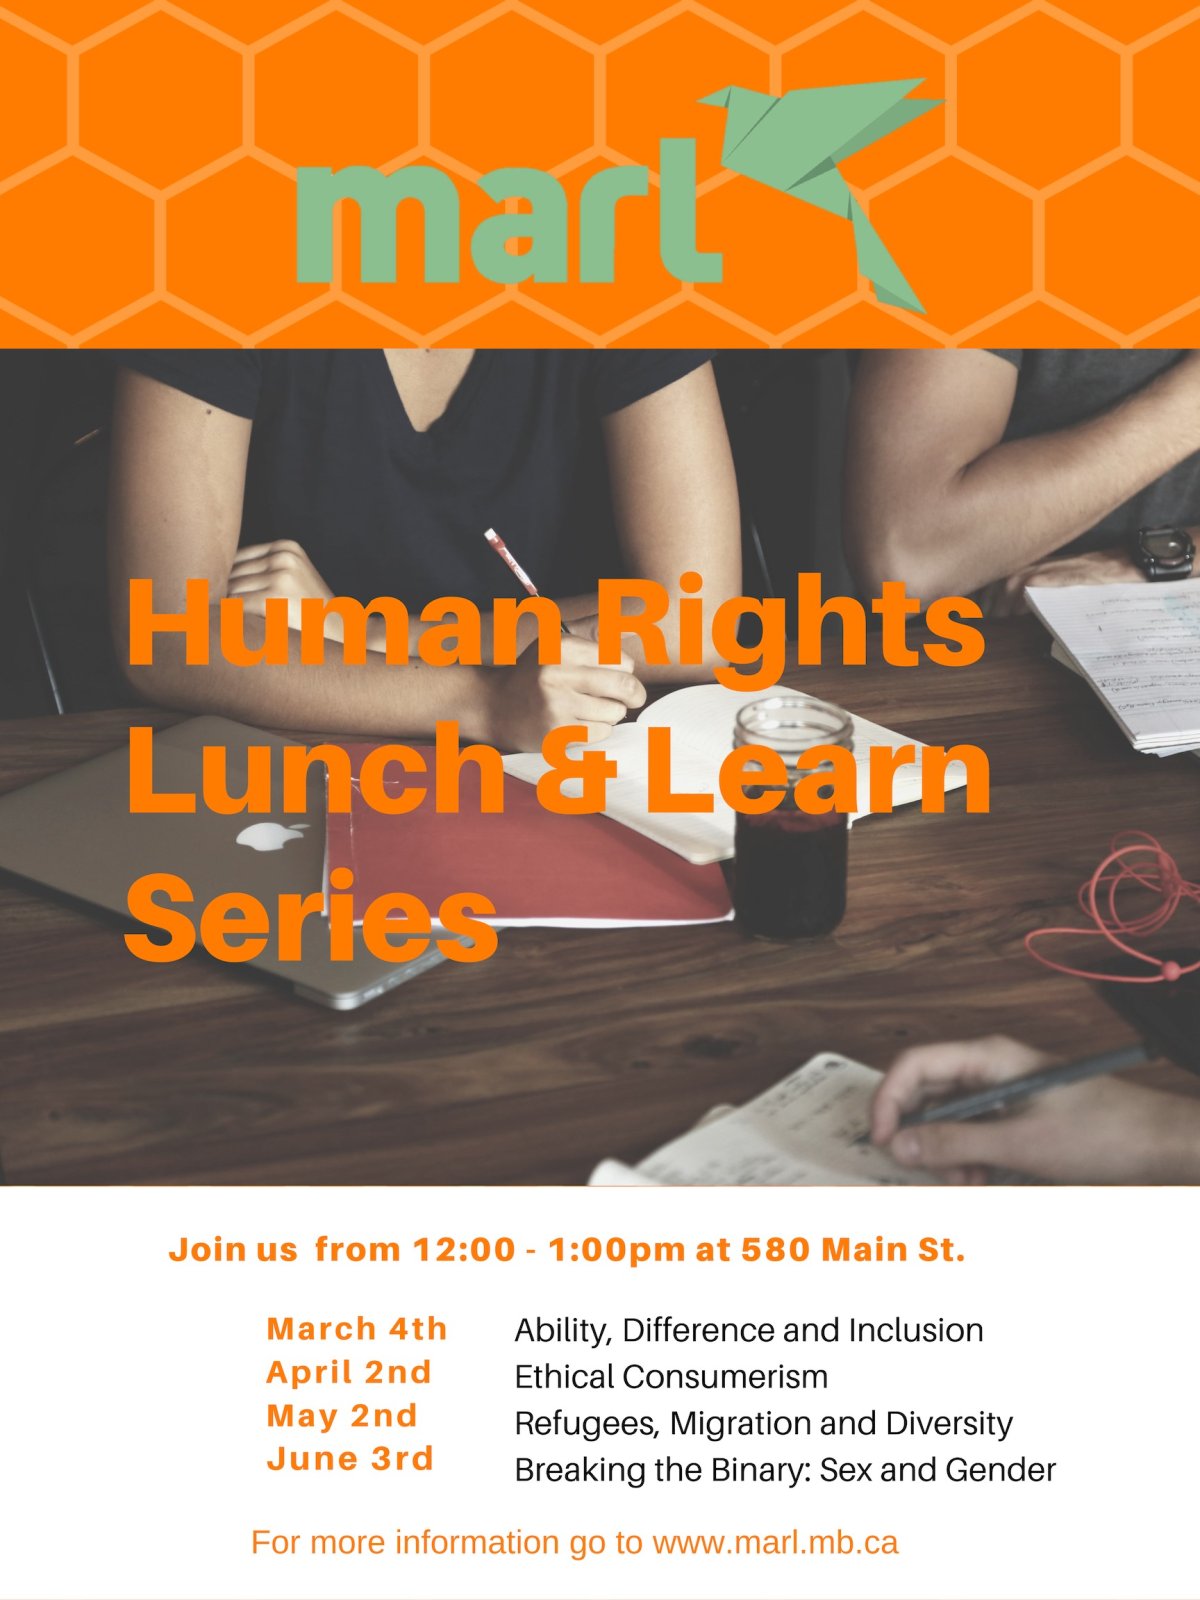 Lunch & Learn Series - image